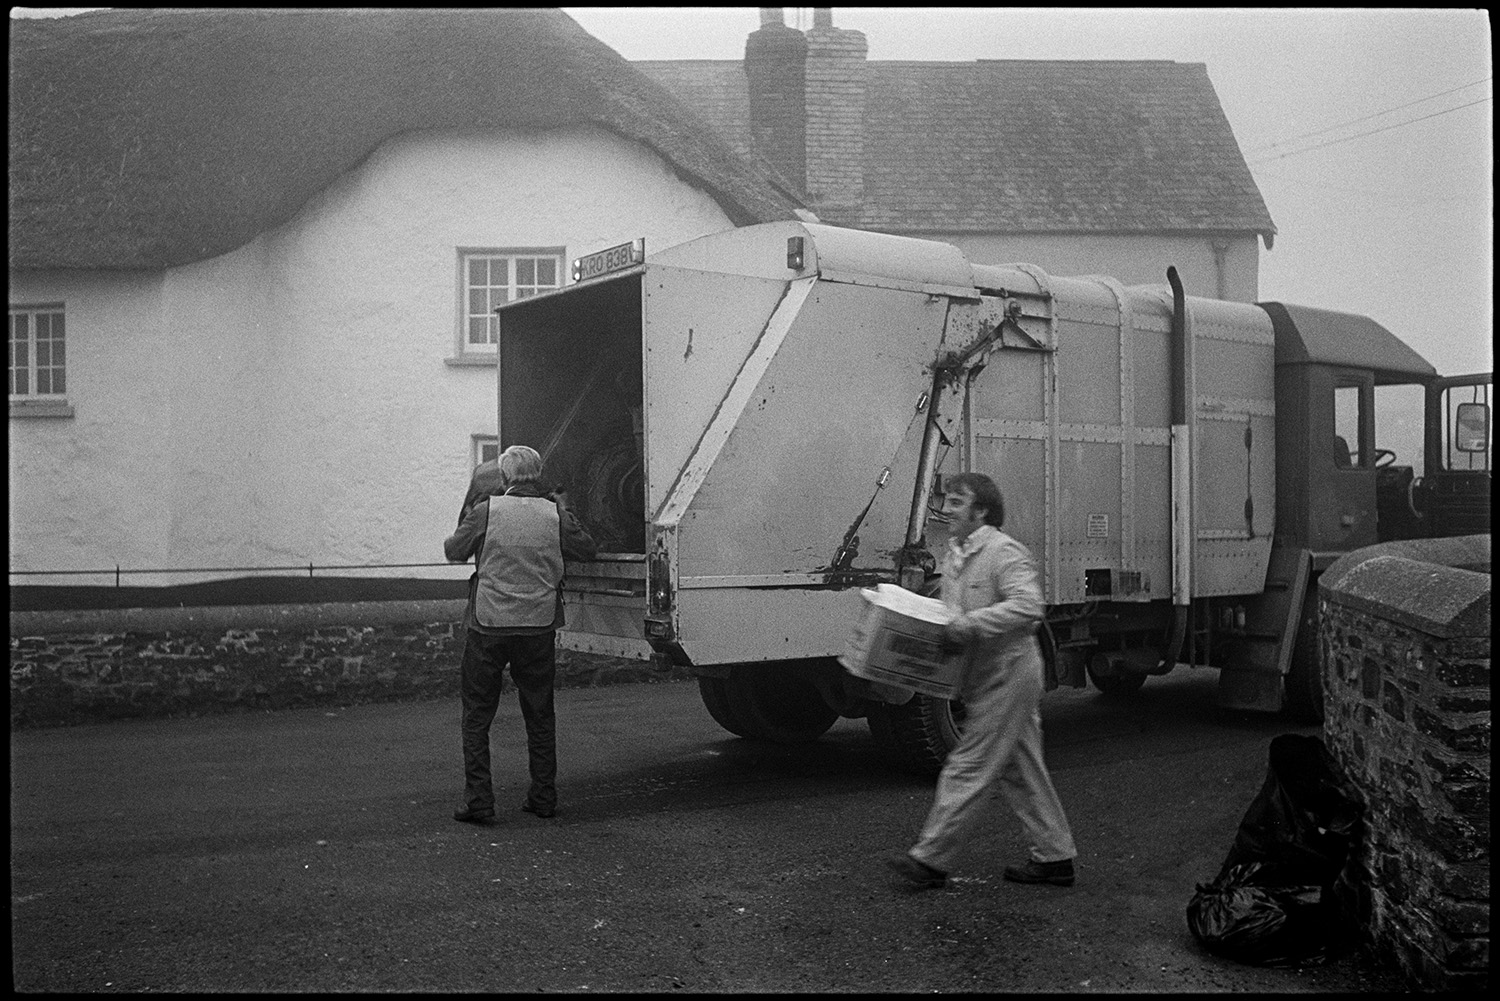 Dustcart lorry in street with men loading rubbish bags.
[A dustcart lorry in the street at Dolton with two men loading bin bags and rubbish into it. A thatched cottage is in the background.]